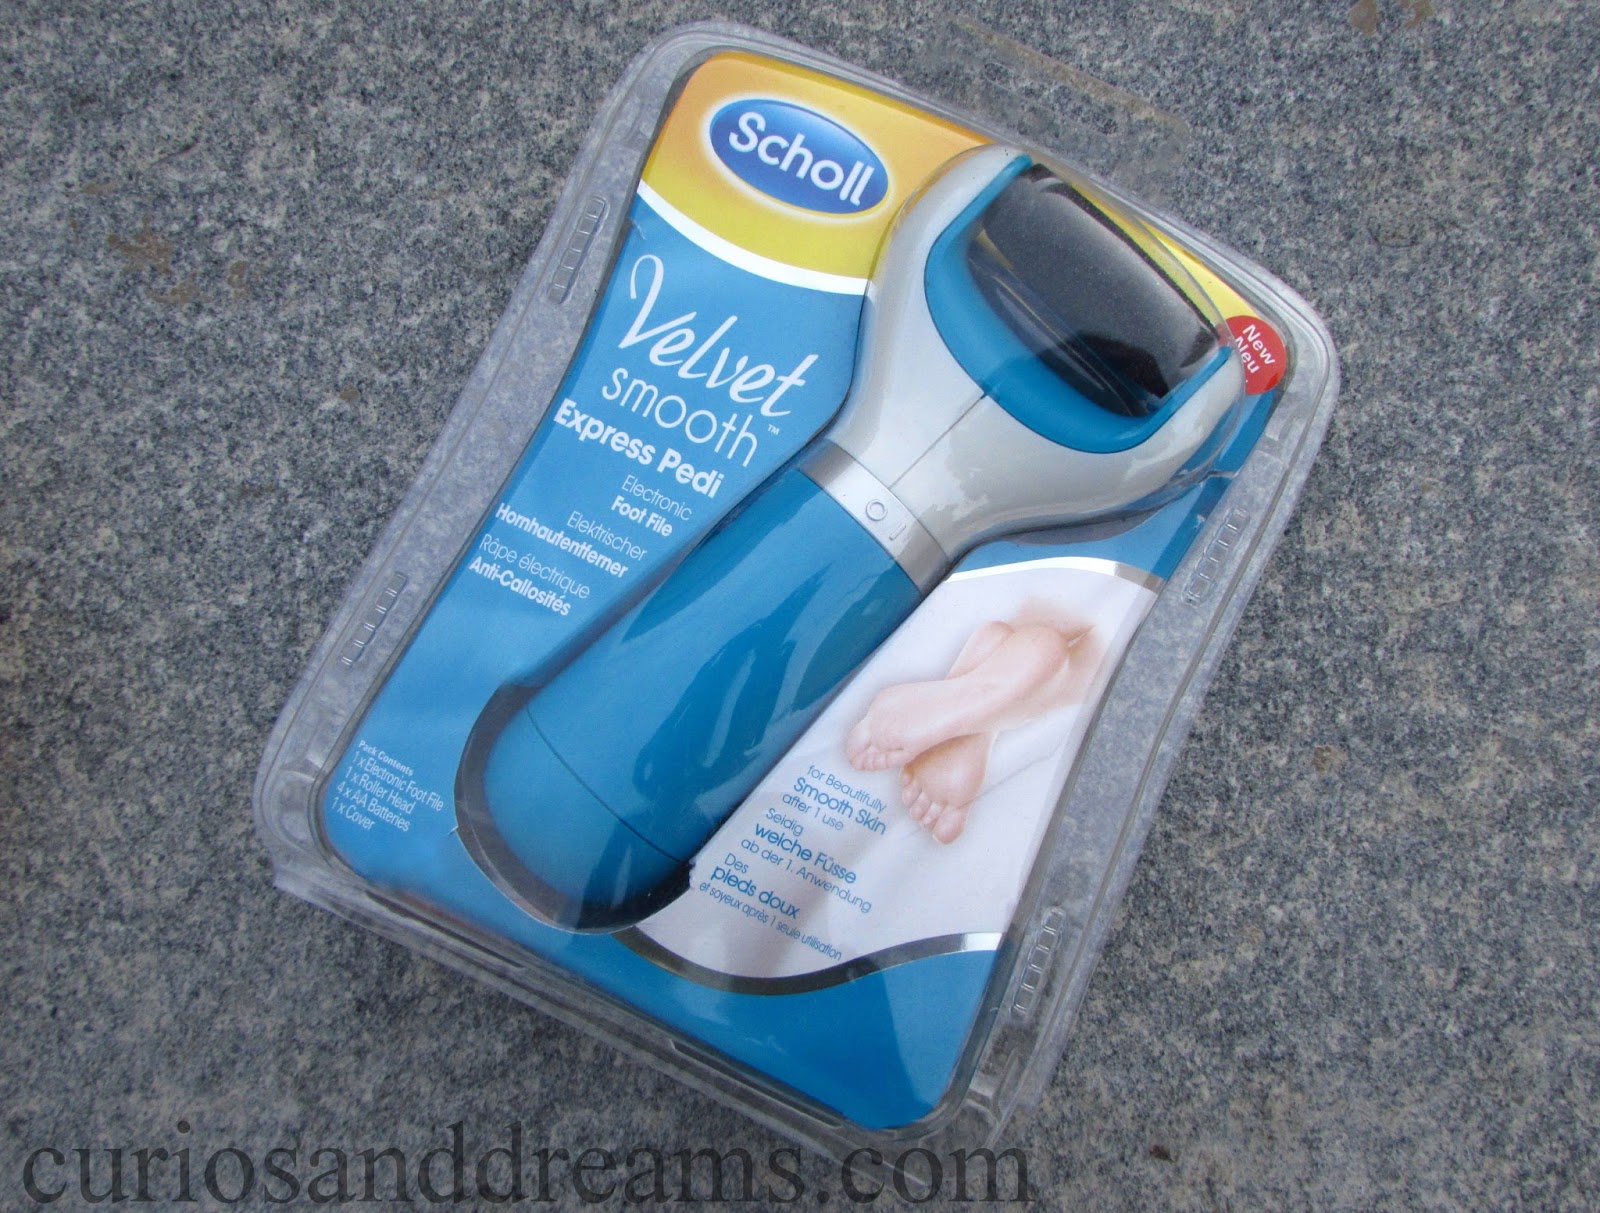 plus Spelen met middag Scholl Velvet Smooth Express Pedi Electronic Foot File : Review & Effects -  Curios and Dreams - Indian Skincare and Beauty